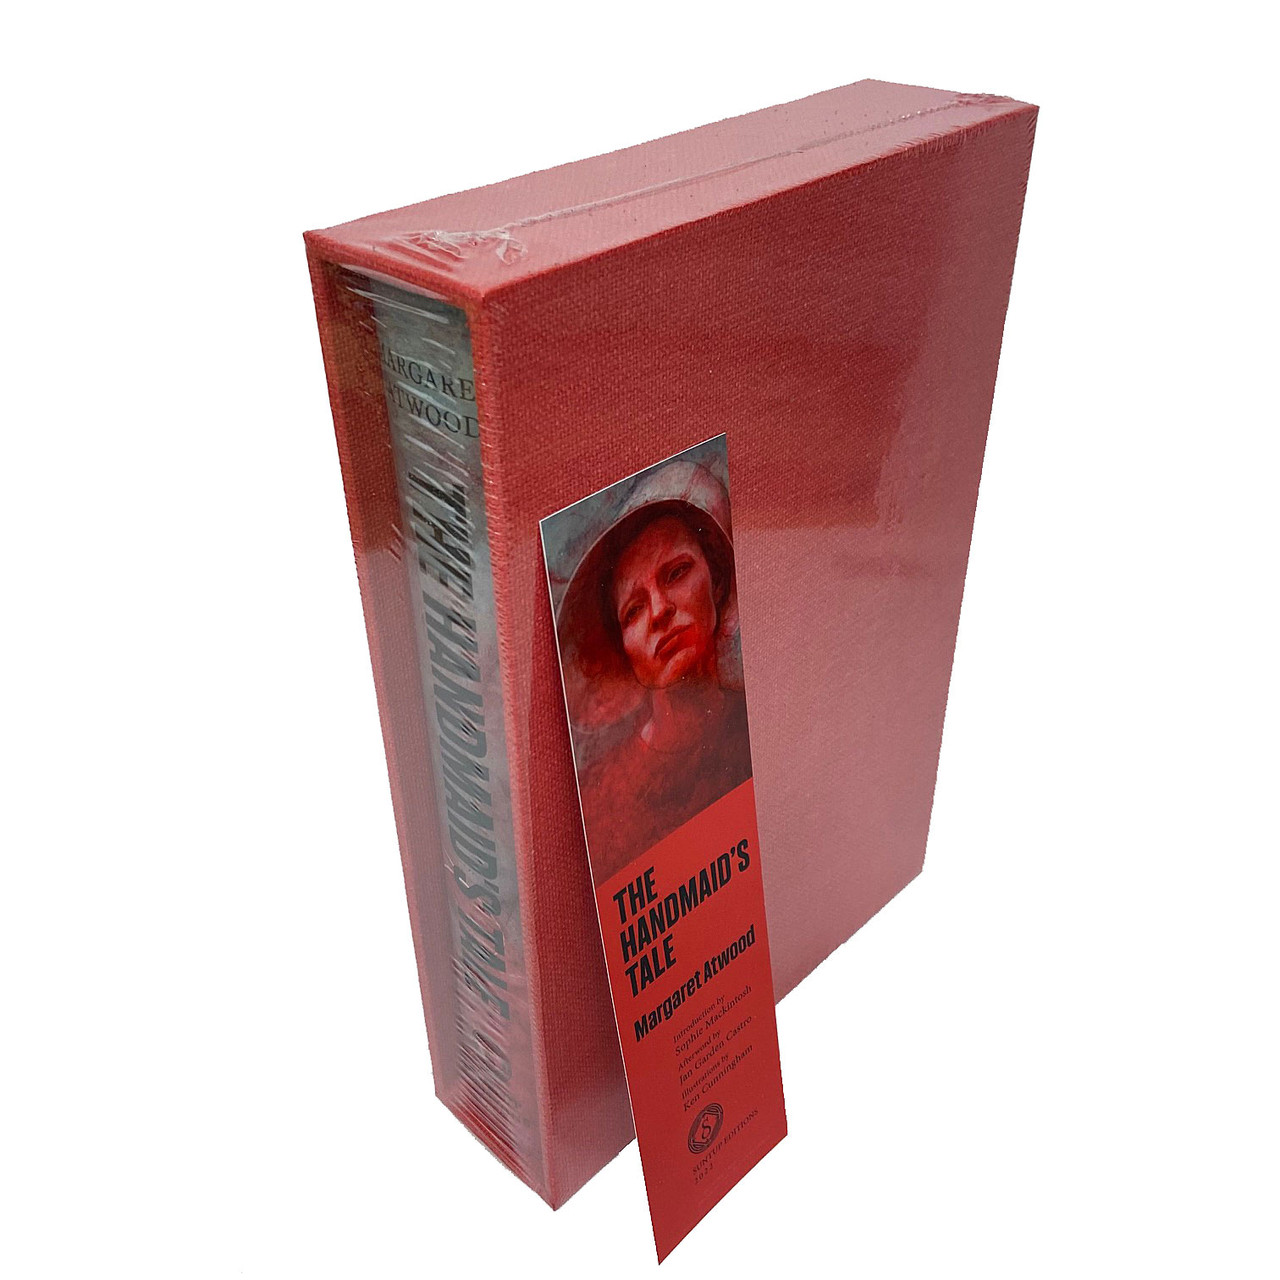 Margaret Atwood "The Handmaid's Tale" Signed Artist Limited Edition of 1,000 [Sealed]